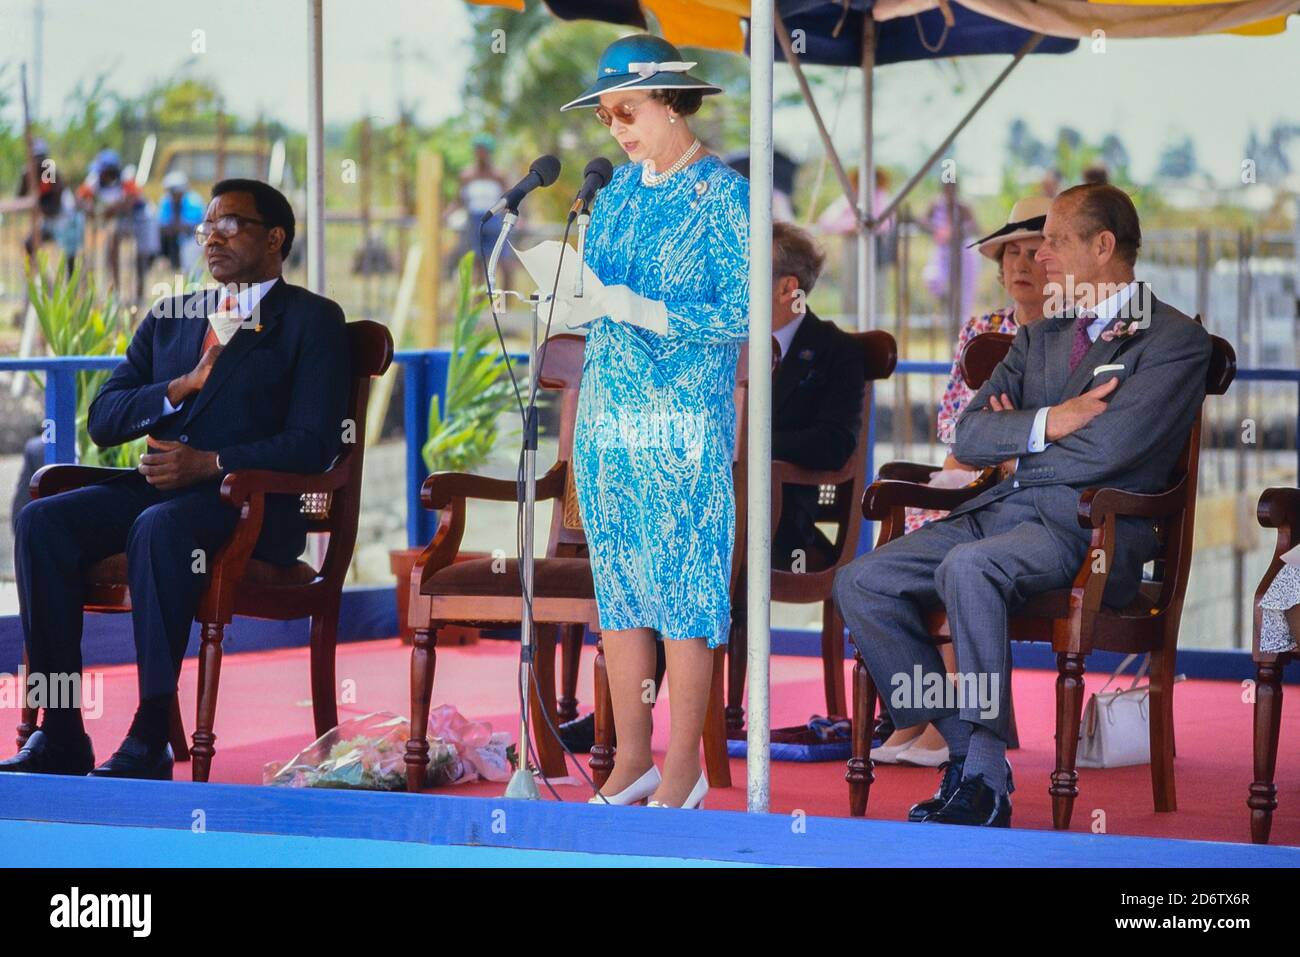 Queen Elizabeth II giving a speech accompanied by Prince Philip, Duke of Edinburgh to a visit to Queen's College to officiate at a stone laying ceremony for the new school building. Barbados, Caribbean. 1989 Stock Photo